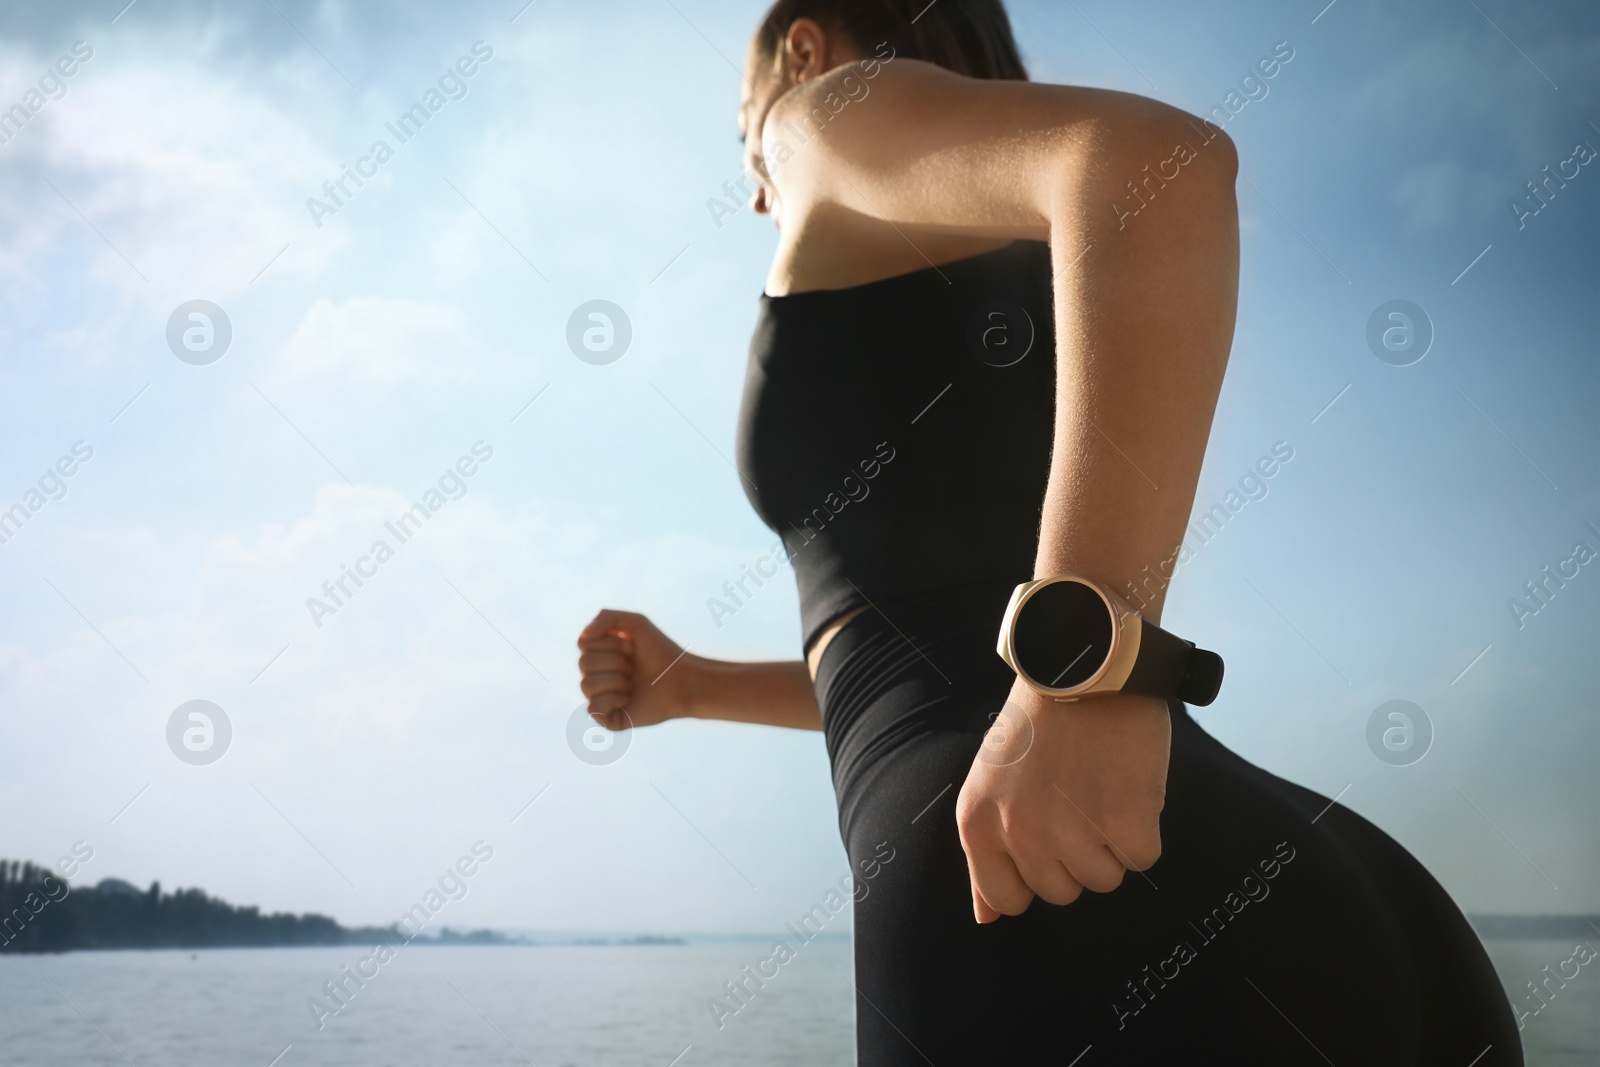 Photo of Woman wearing modern smart watch during training near river, focus on hand